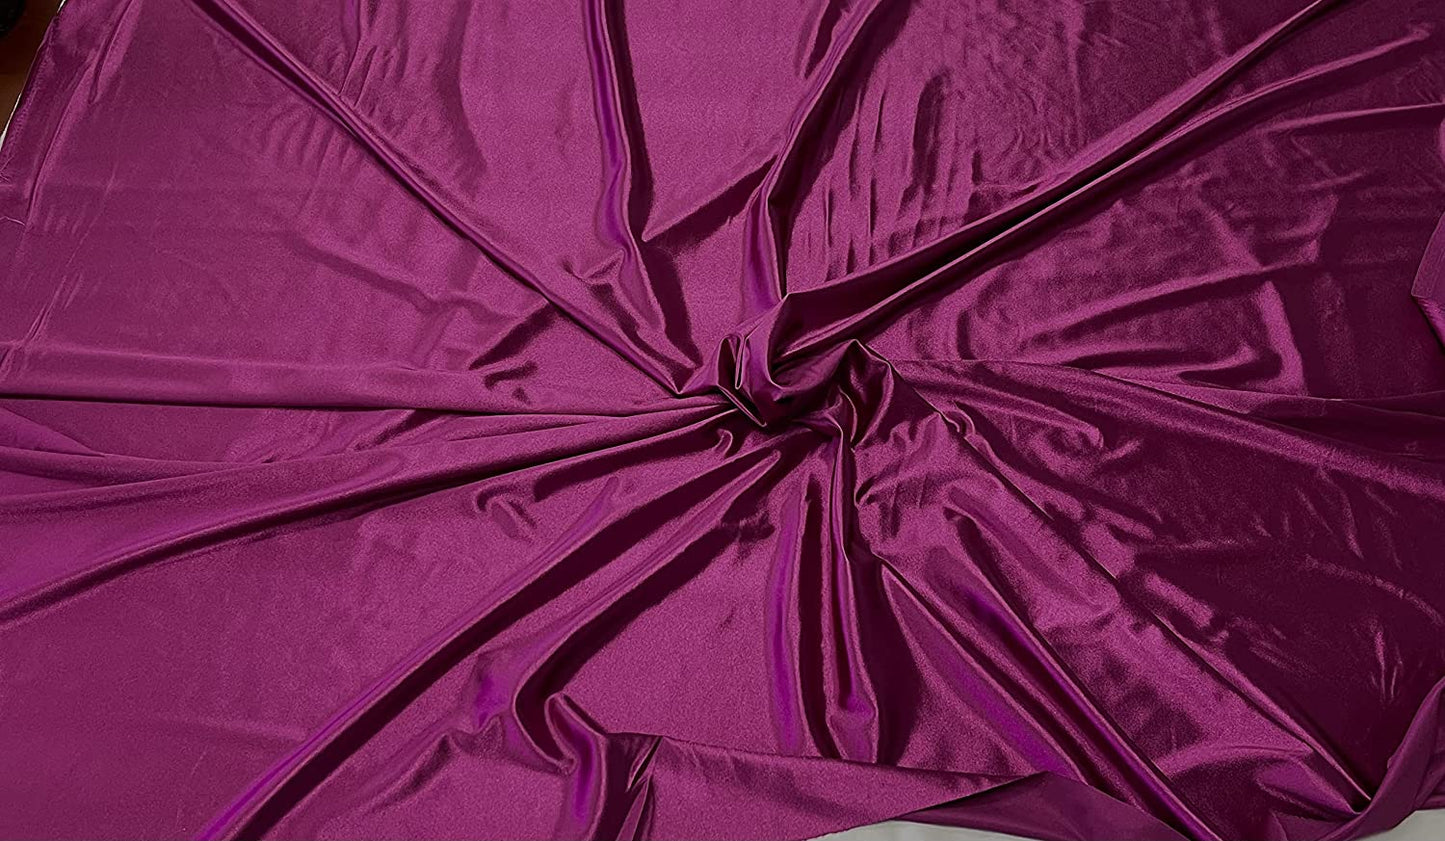 Deluxe Shiny Polyester Spandex Stretch Fabric (1 Yard, Magenta)